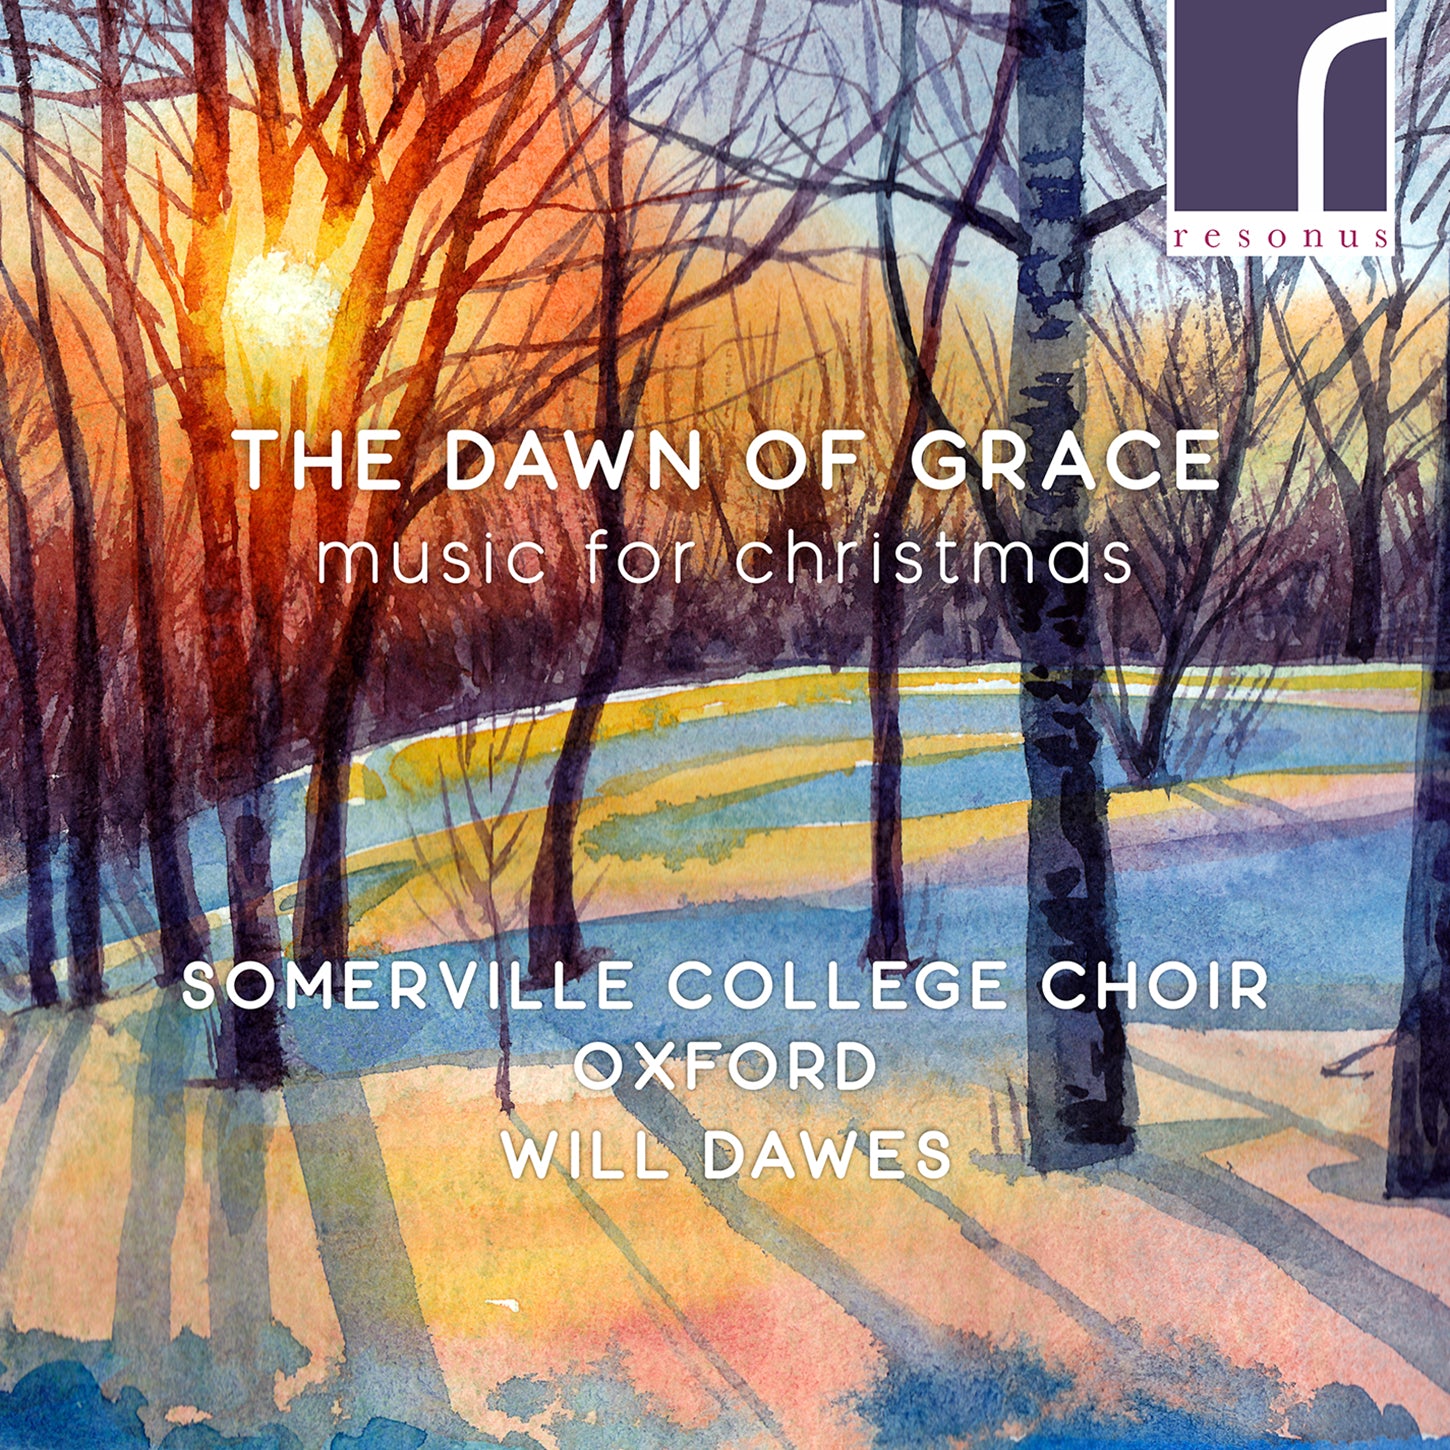 The Dawn of Grace - Music for Christmas / Dawes, Somerville College Choir Oxford